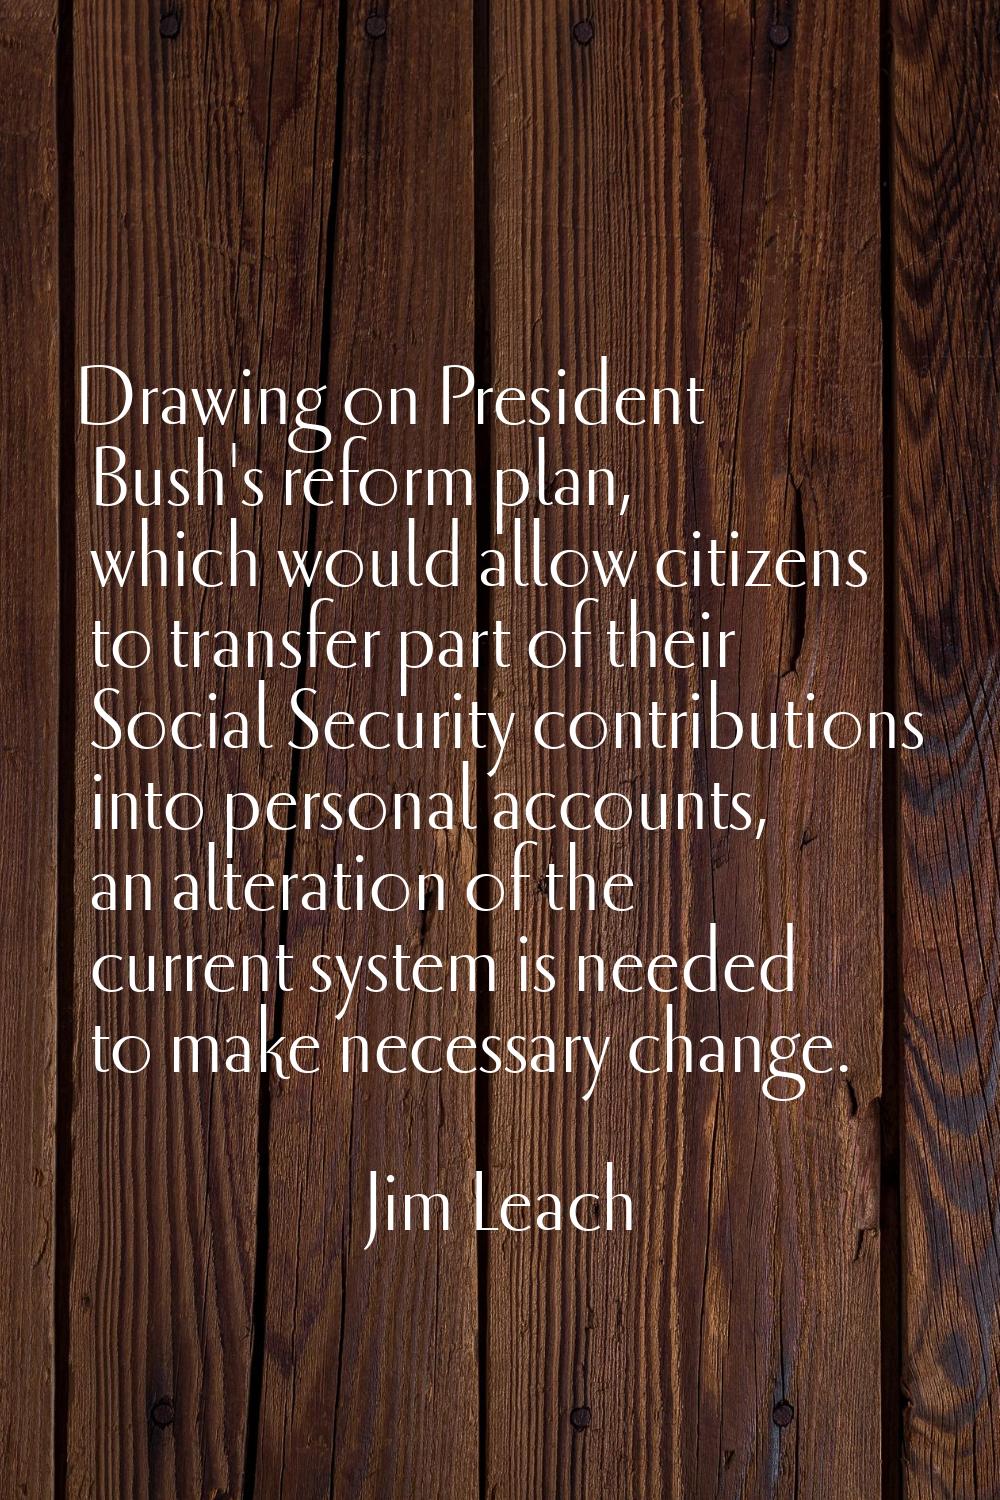 Drawing on President Bush's reform plan, which would allow citizens to transfer part of their Socia